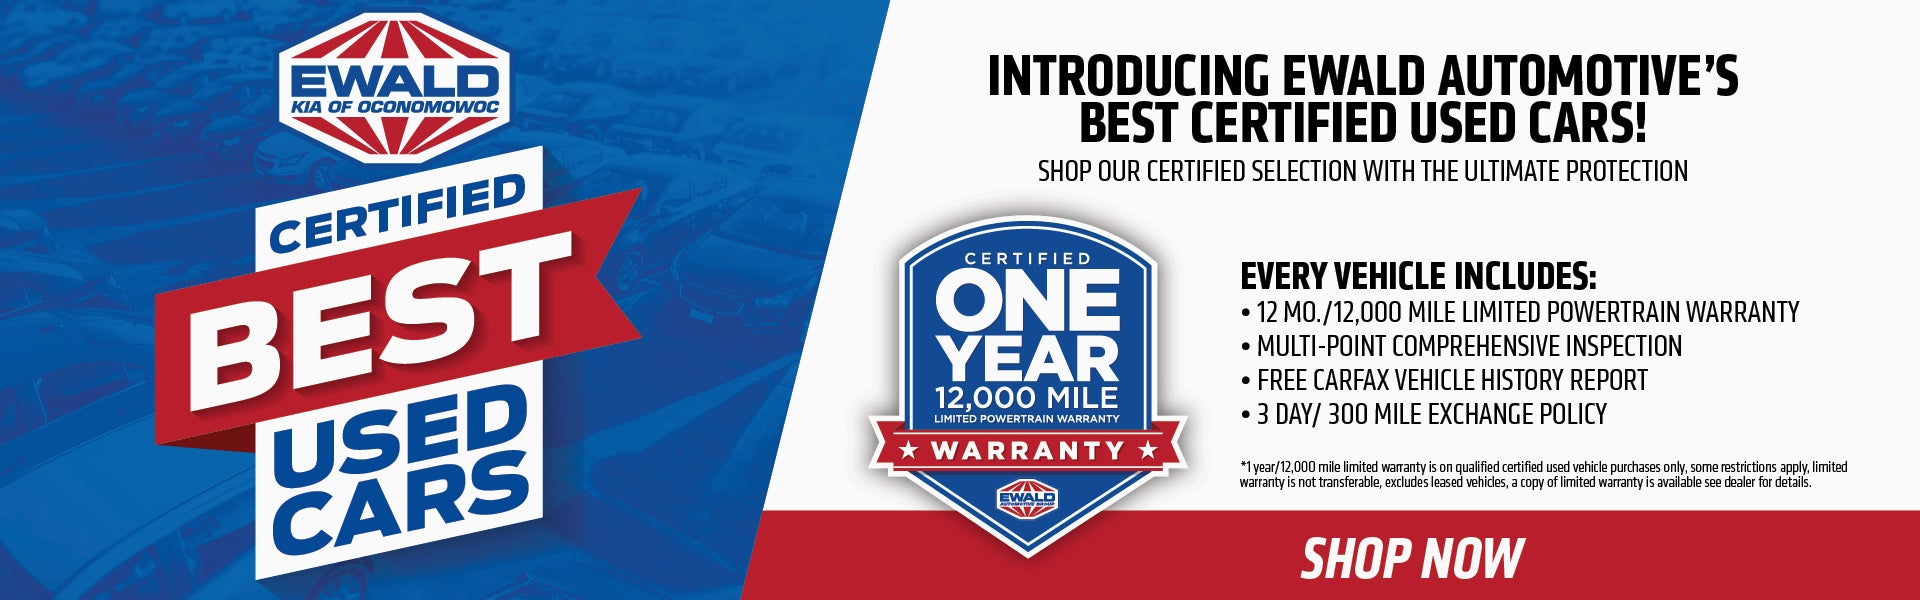 Certified Best Used Cars